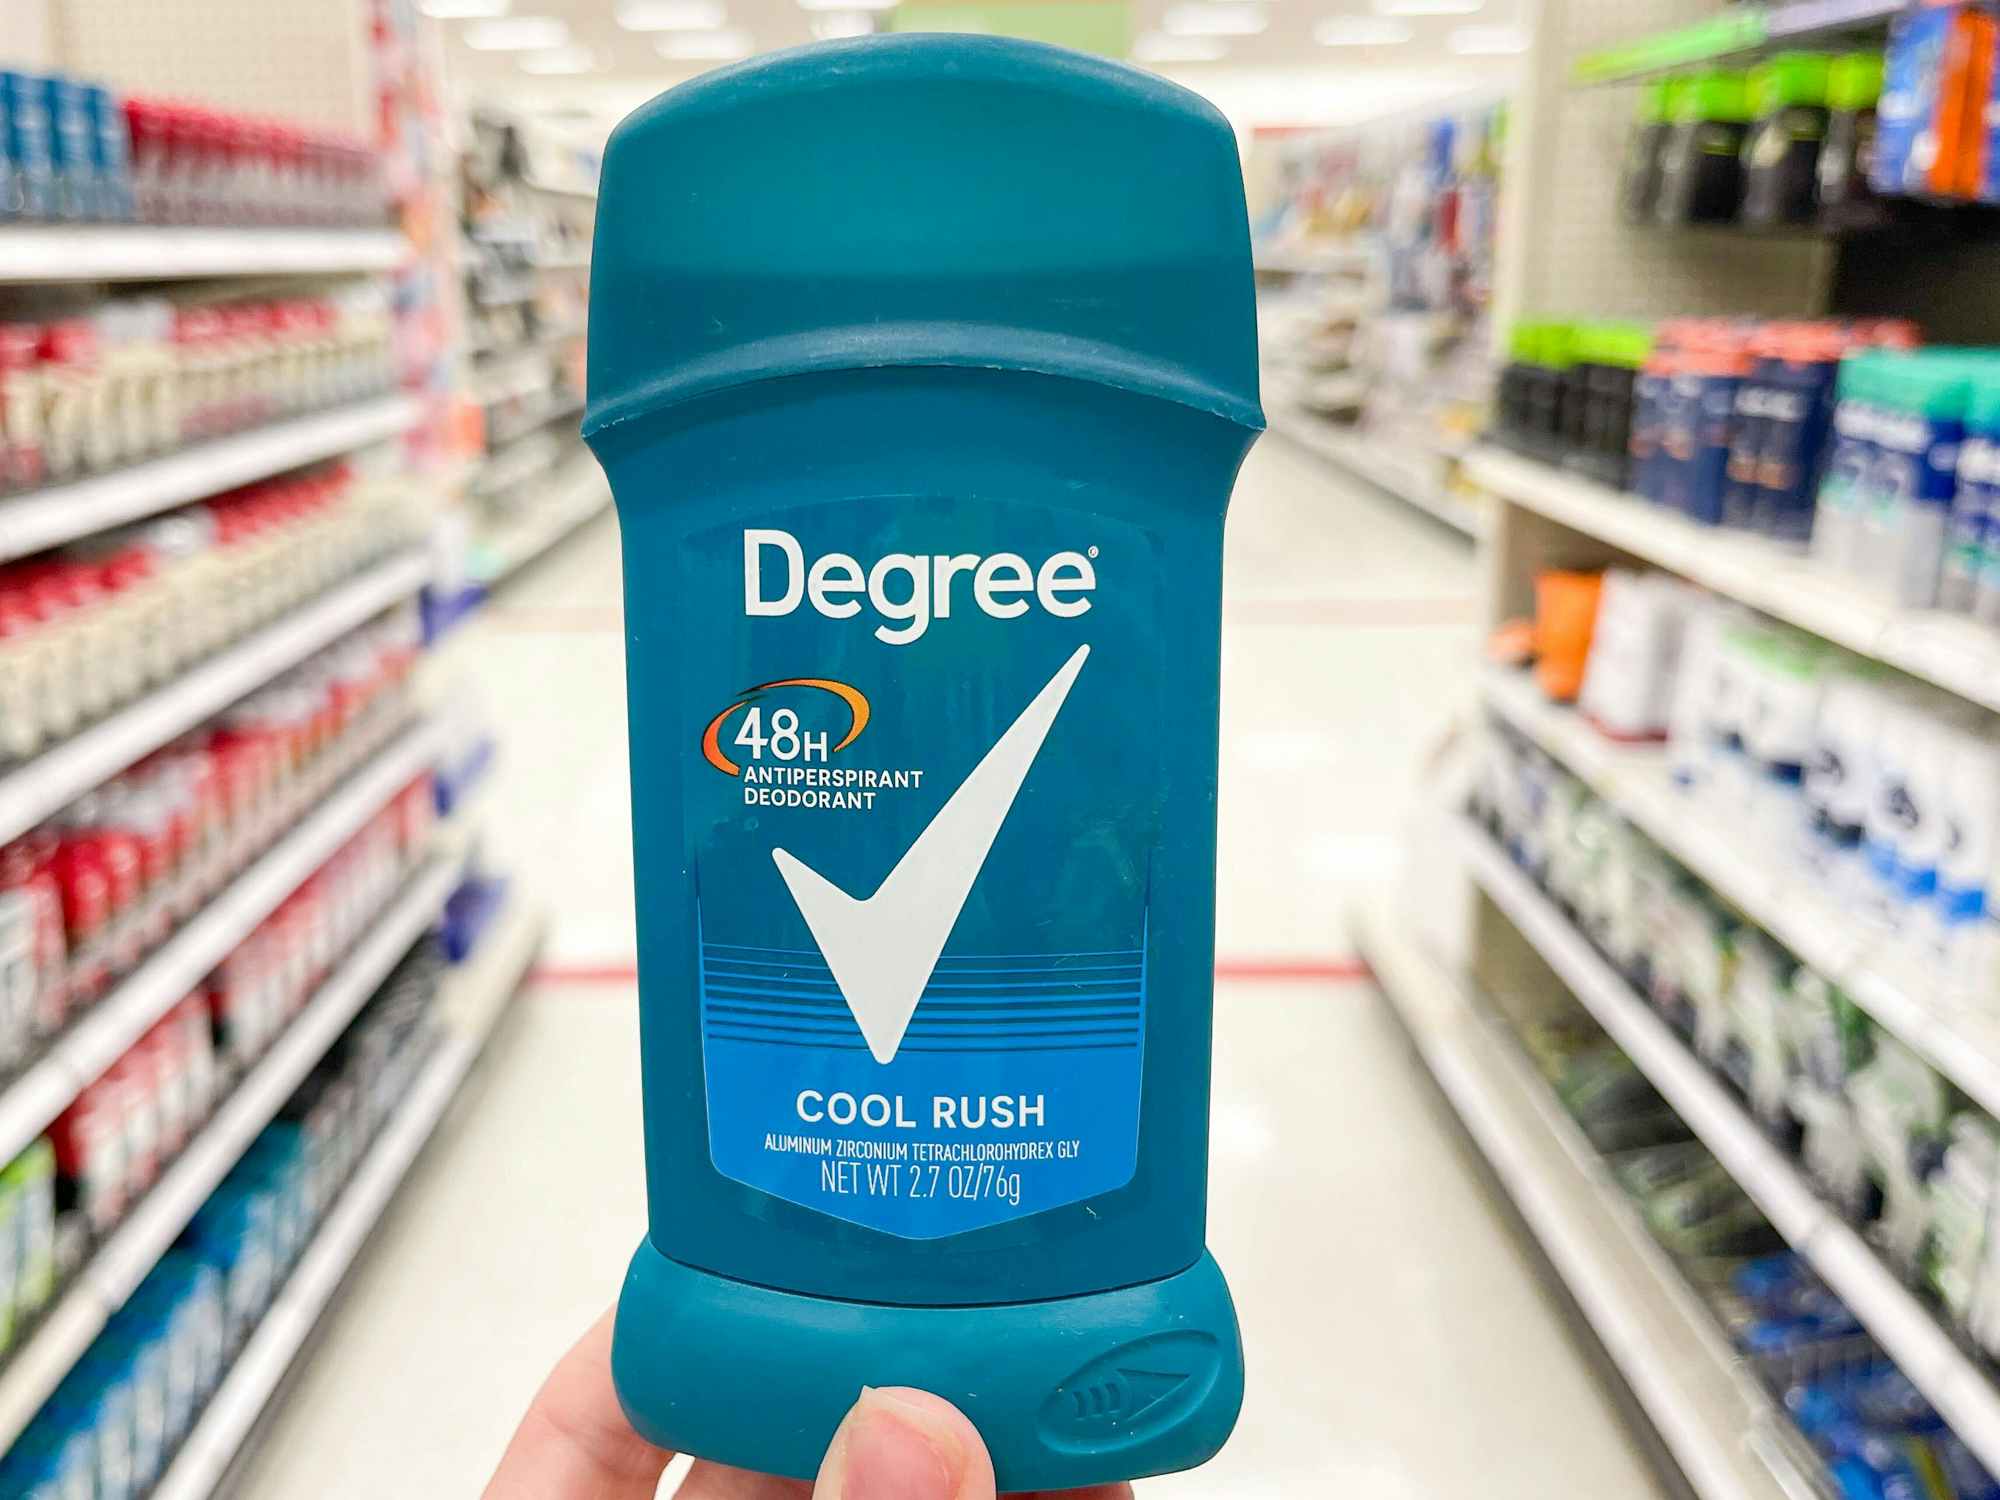 Someone holding Degree men's deodorant in a store